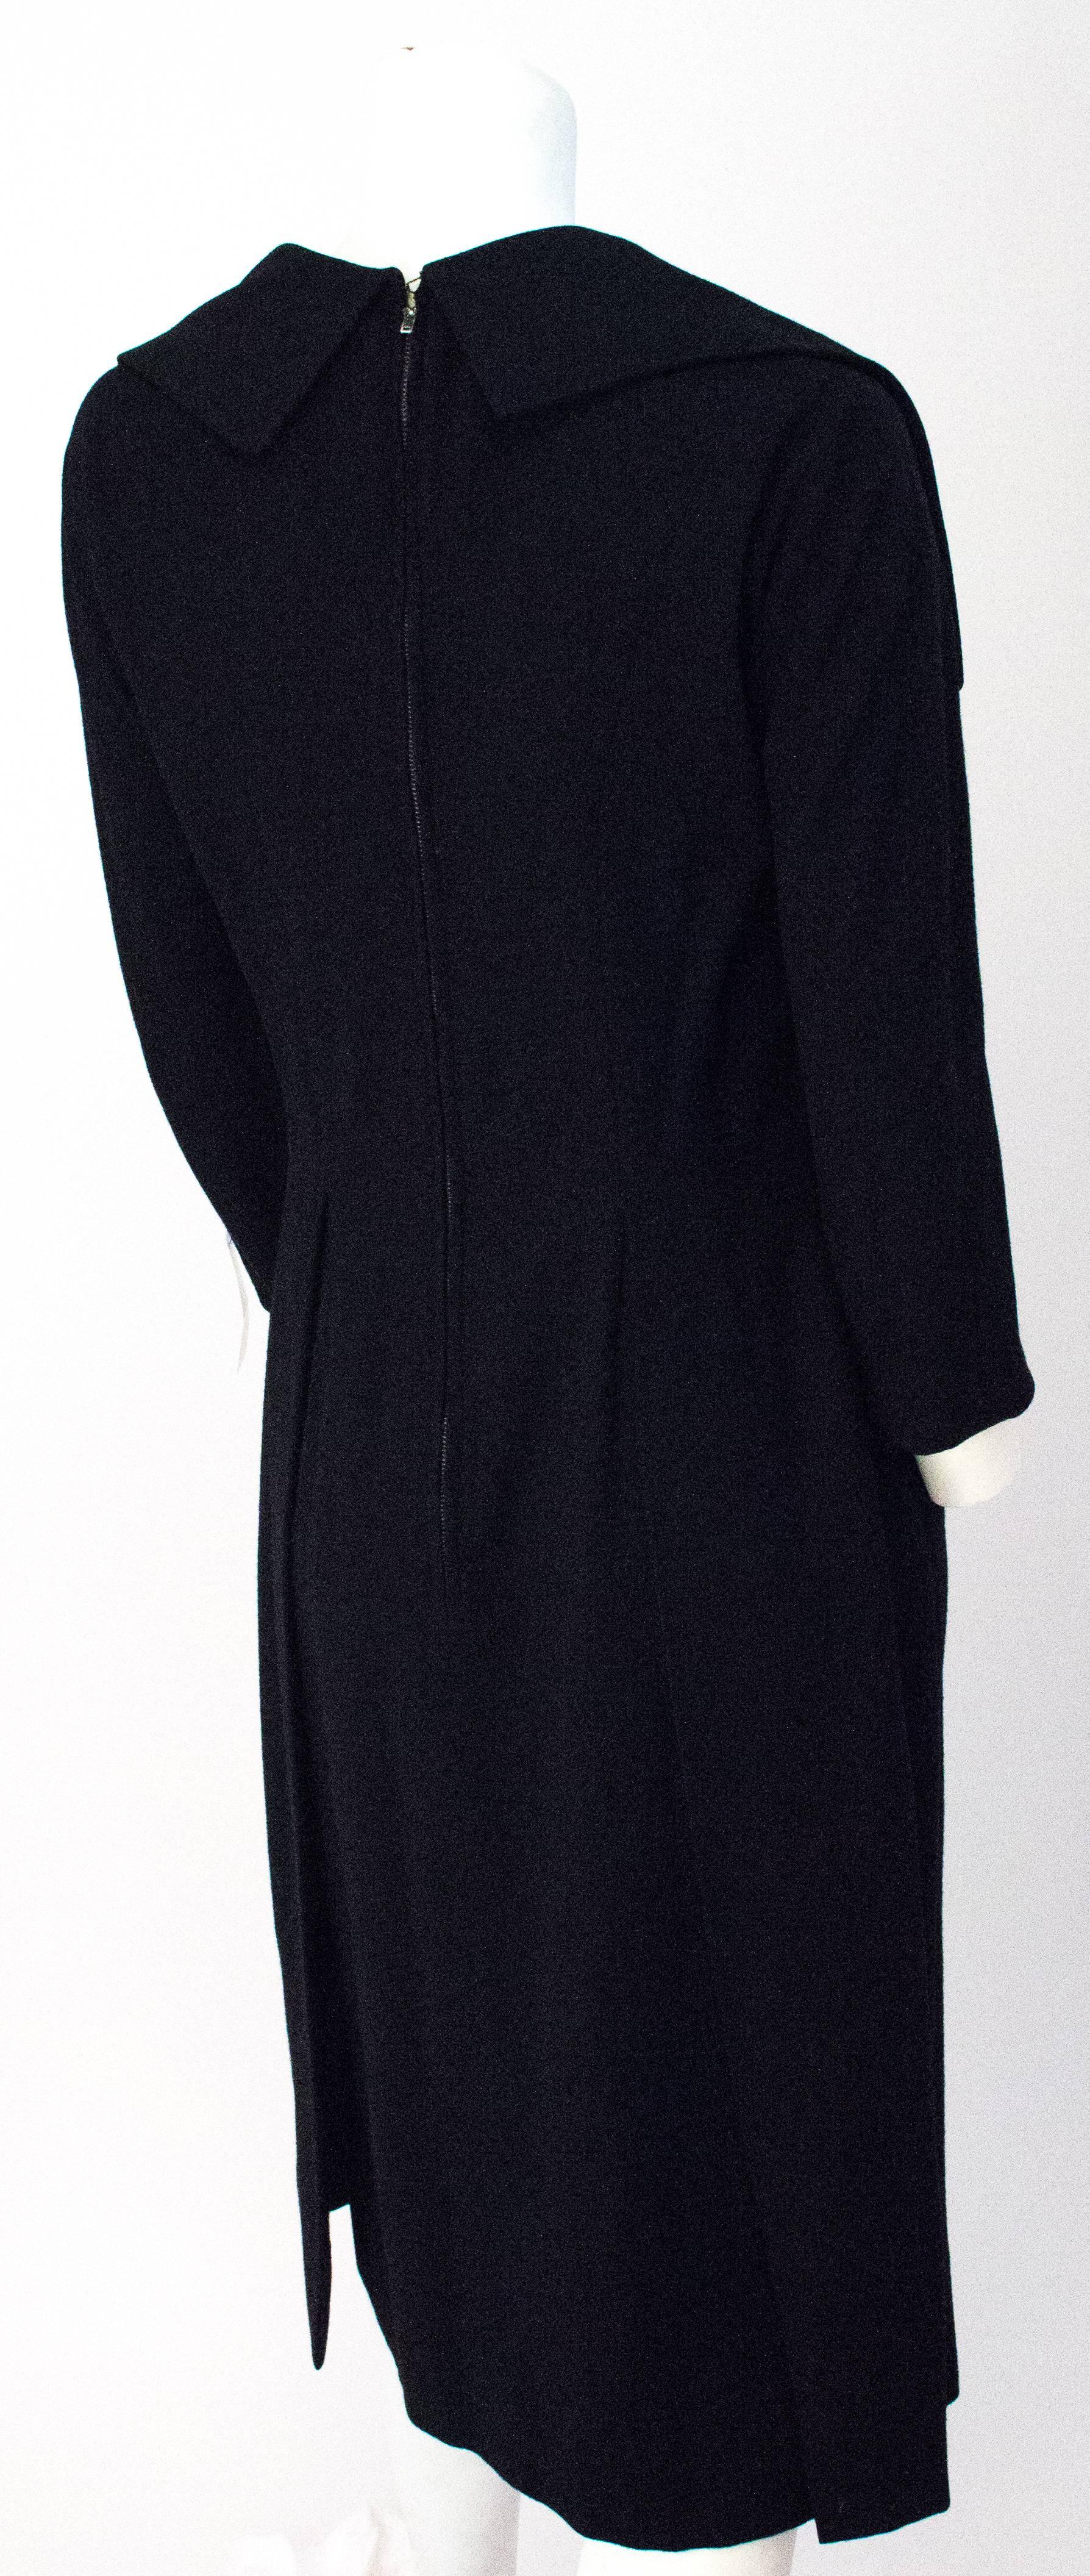 50s Black Wool V Neck 3/4 Sleeve Fitted Dress. Beaded buttons adorn the front collar detail. Metal zipper up the back. Fitted design. Fully lined. 

